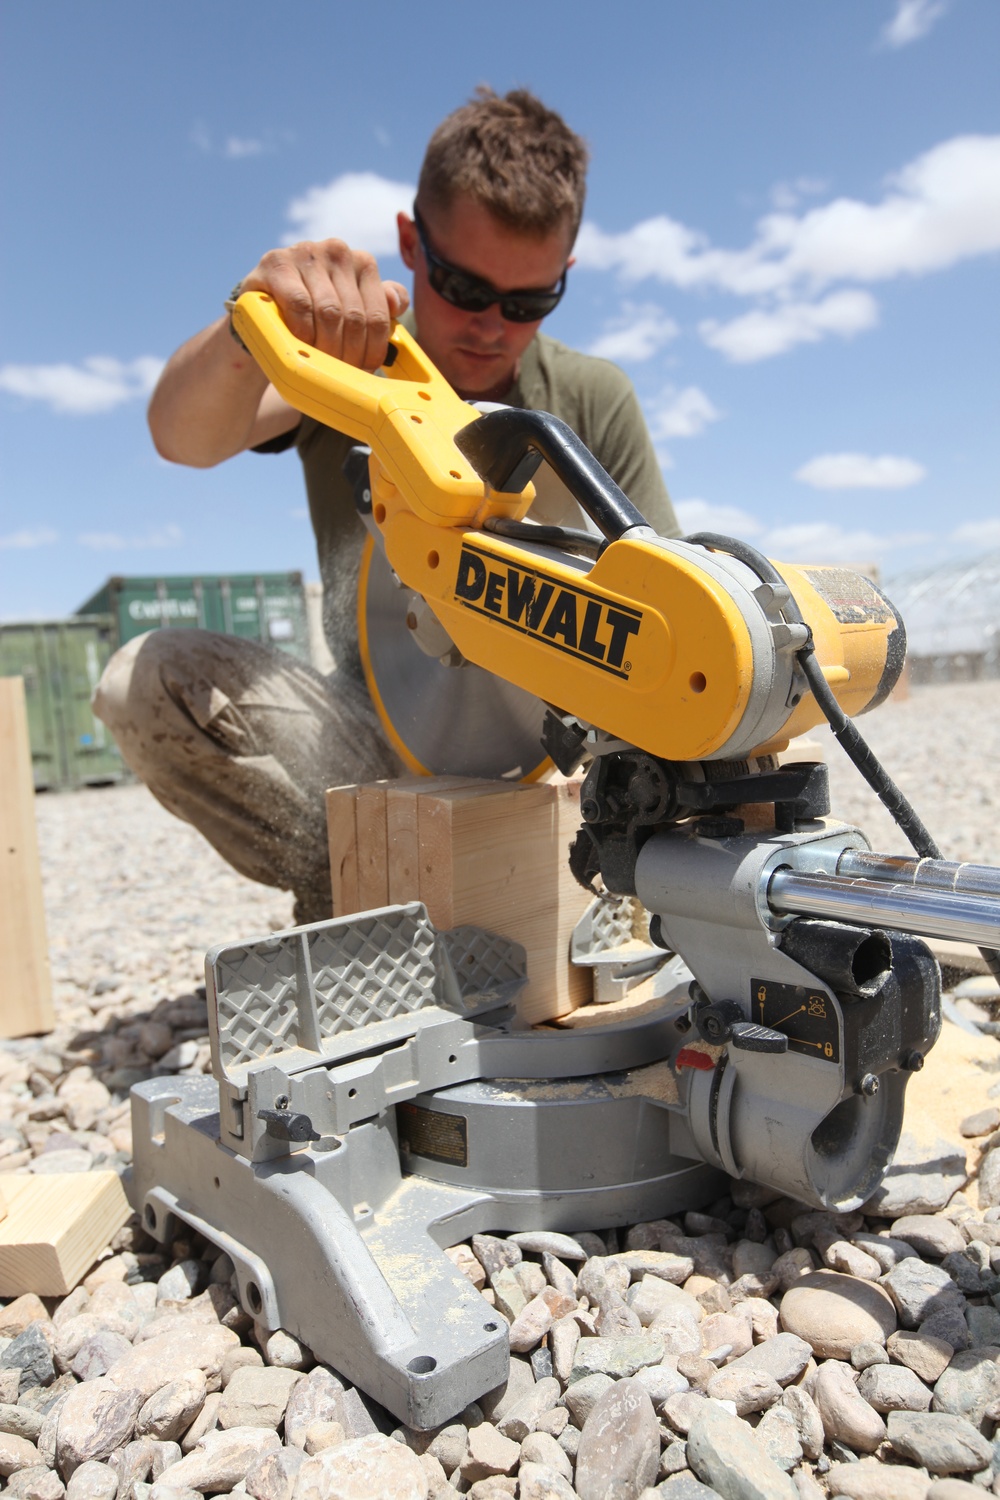 Building on success: Marine engineers construct SWA huts, patrol bases